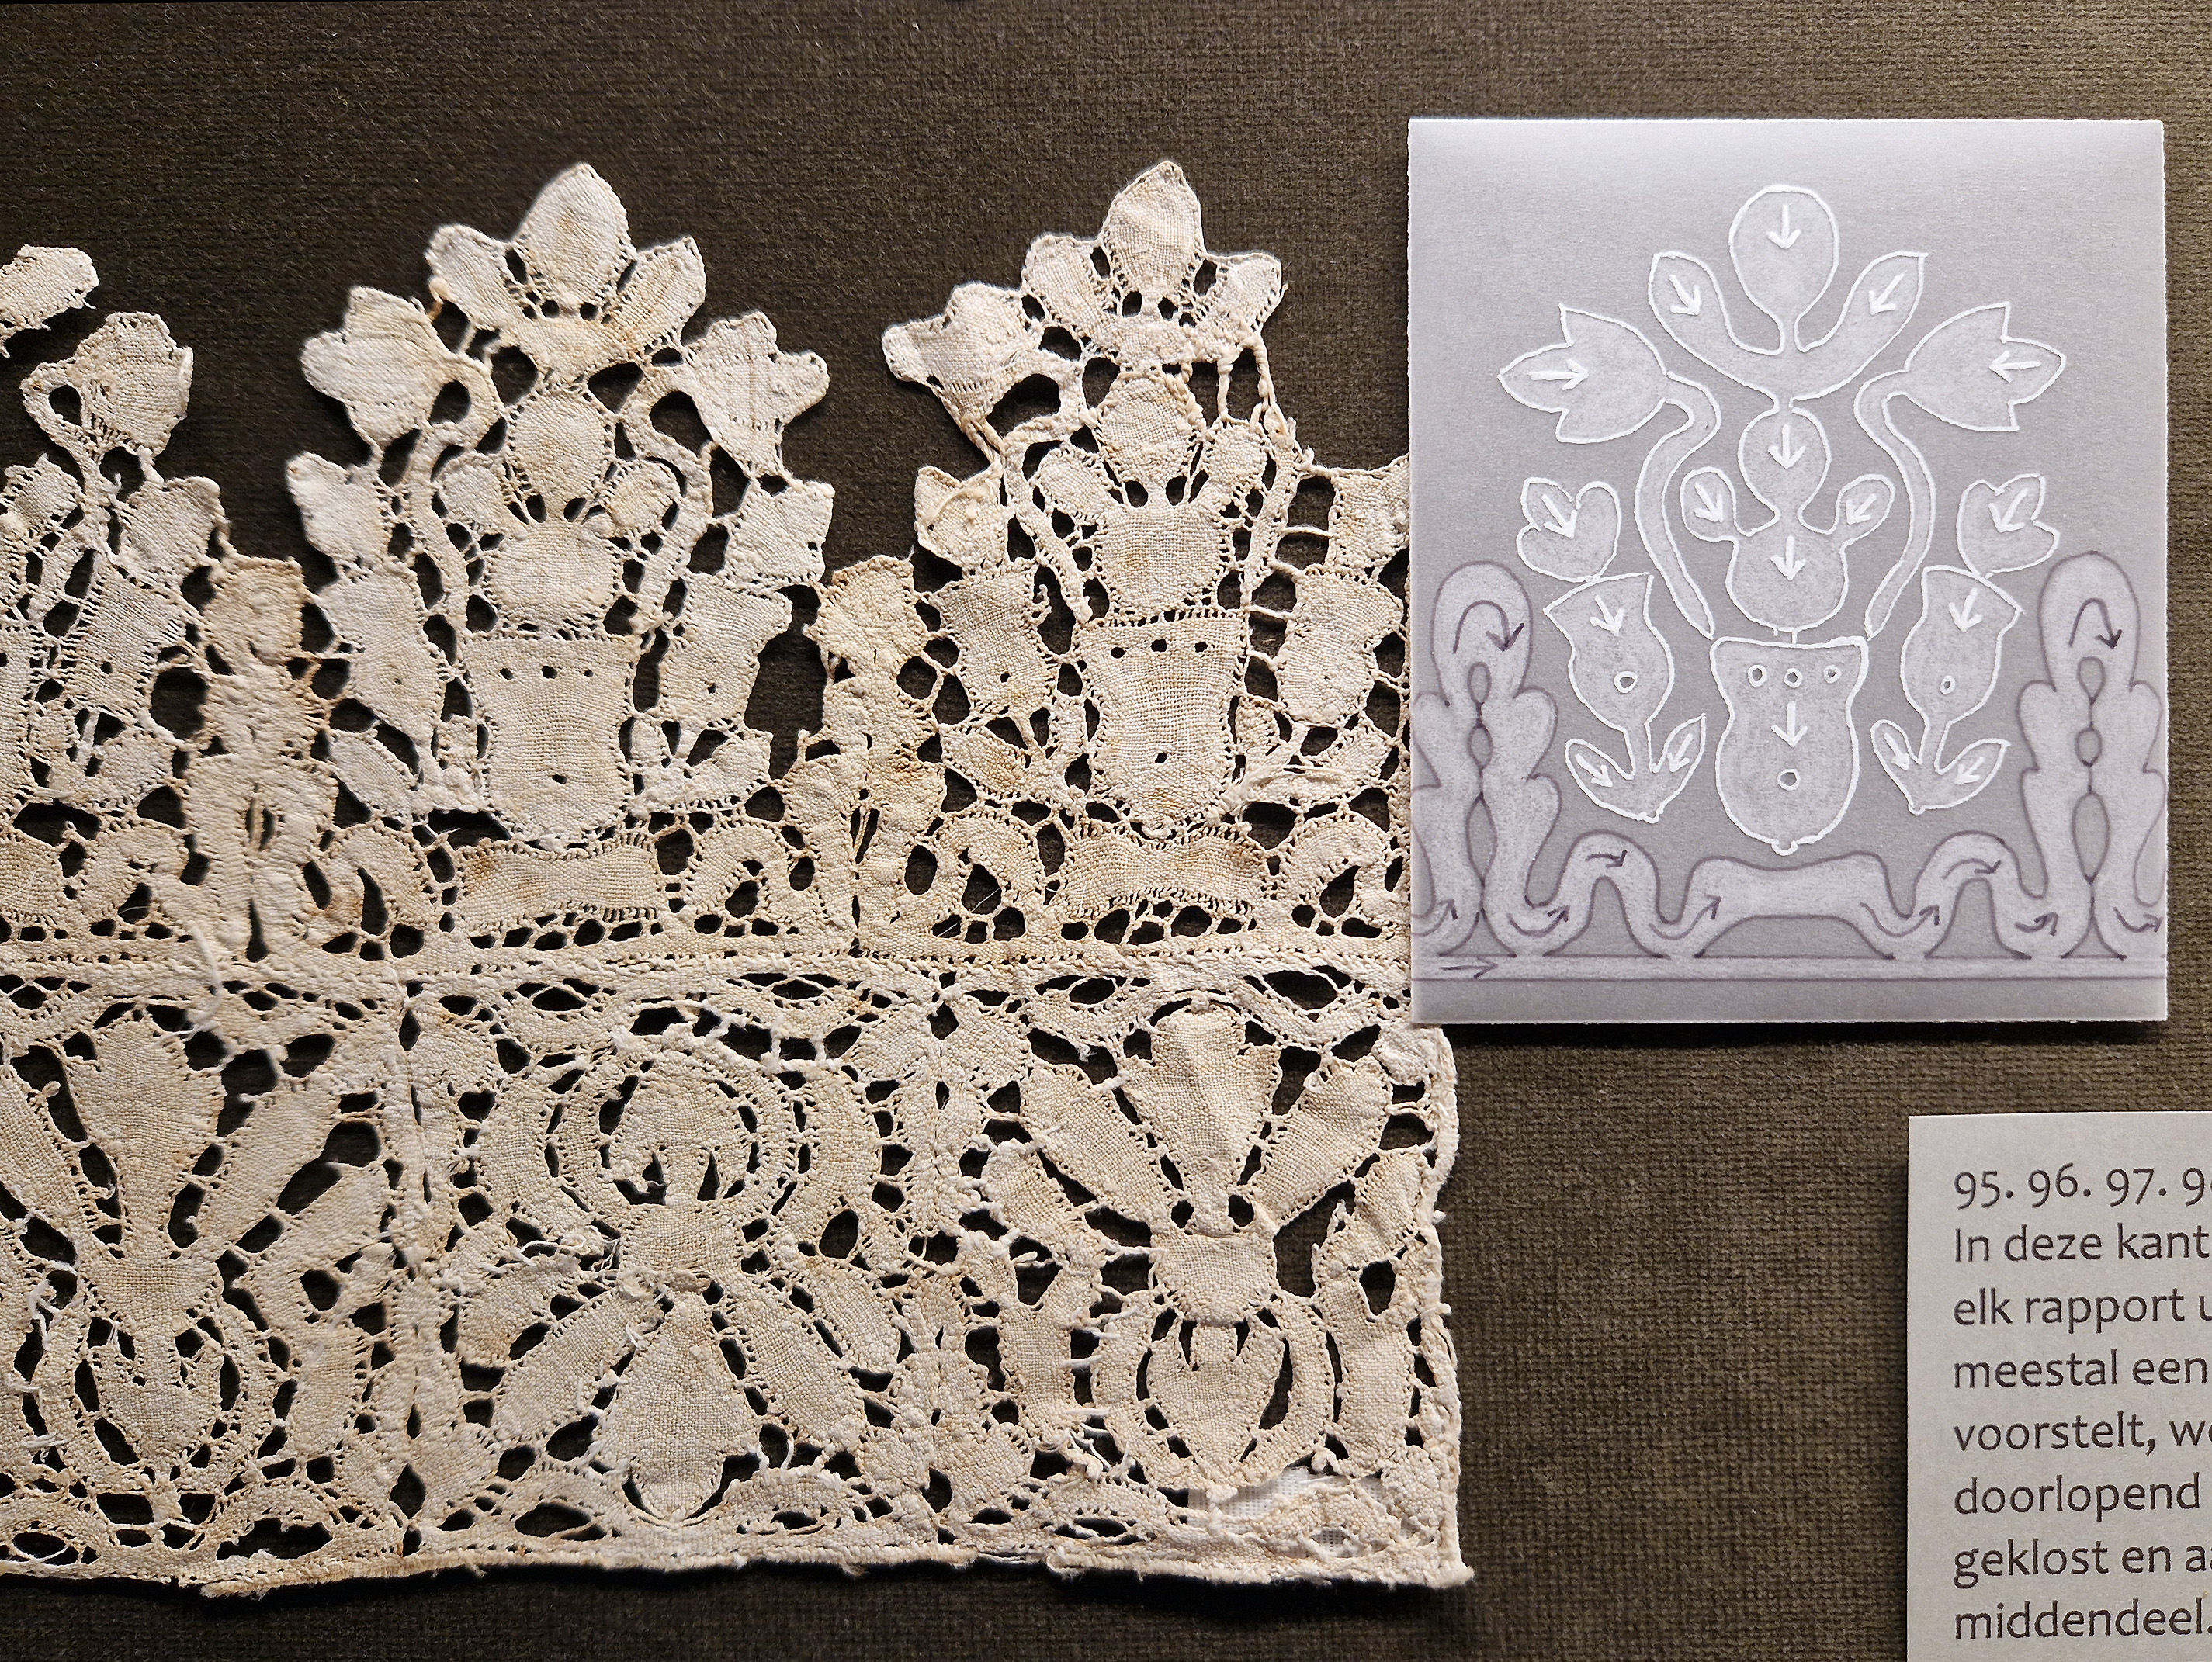 Construction of Van Dyke Lace